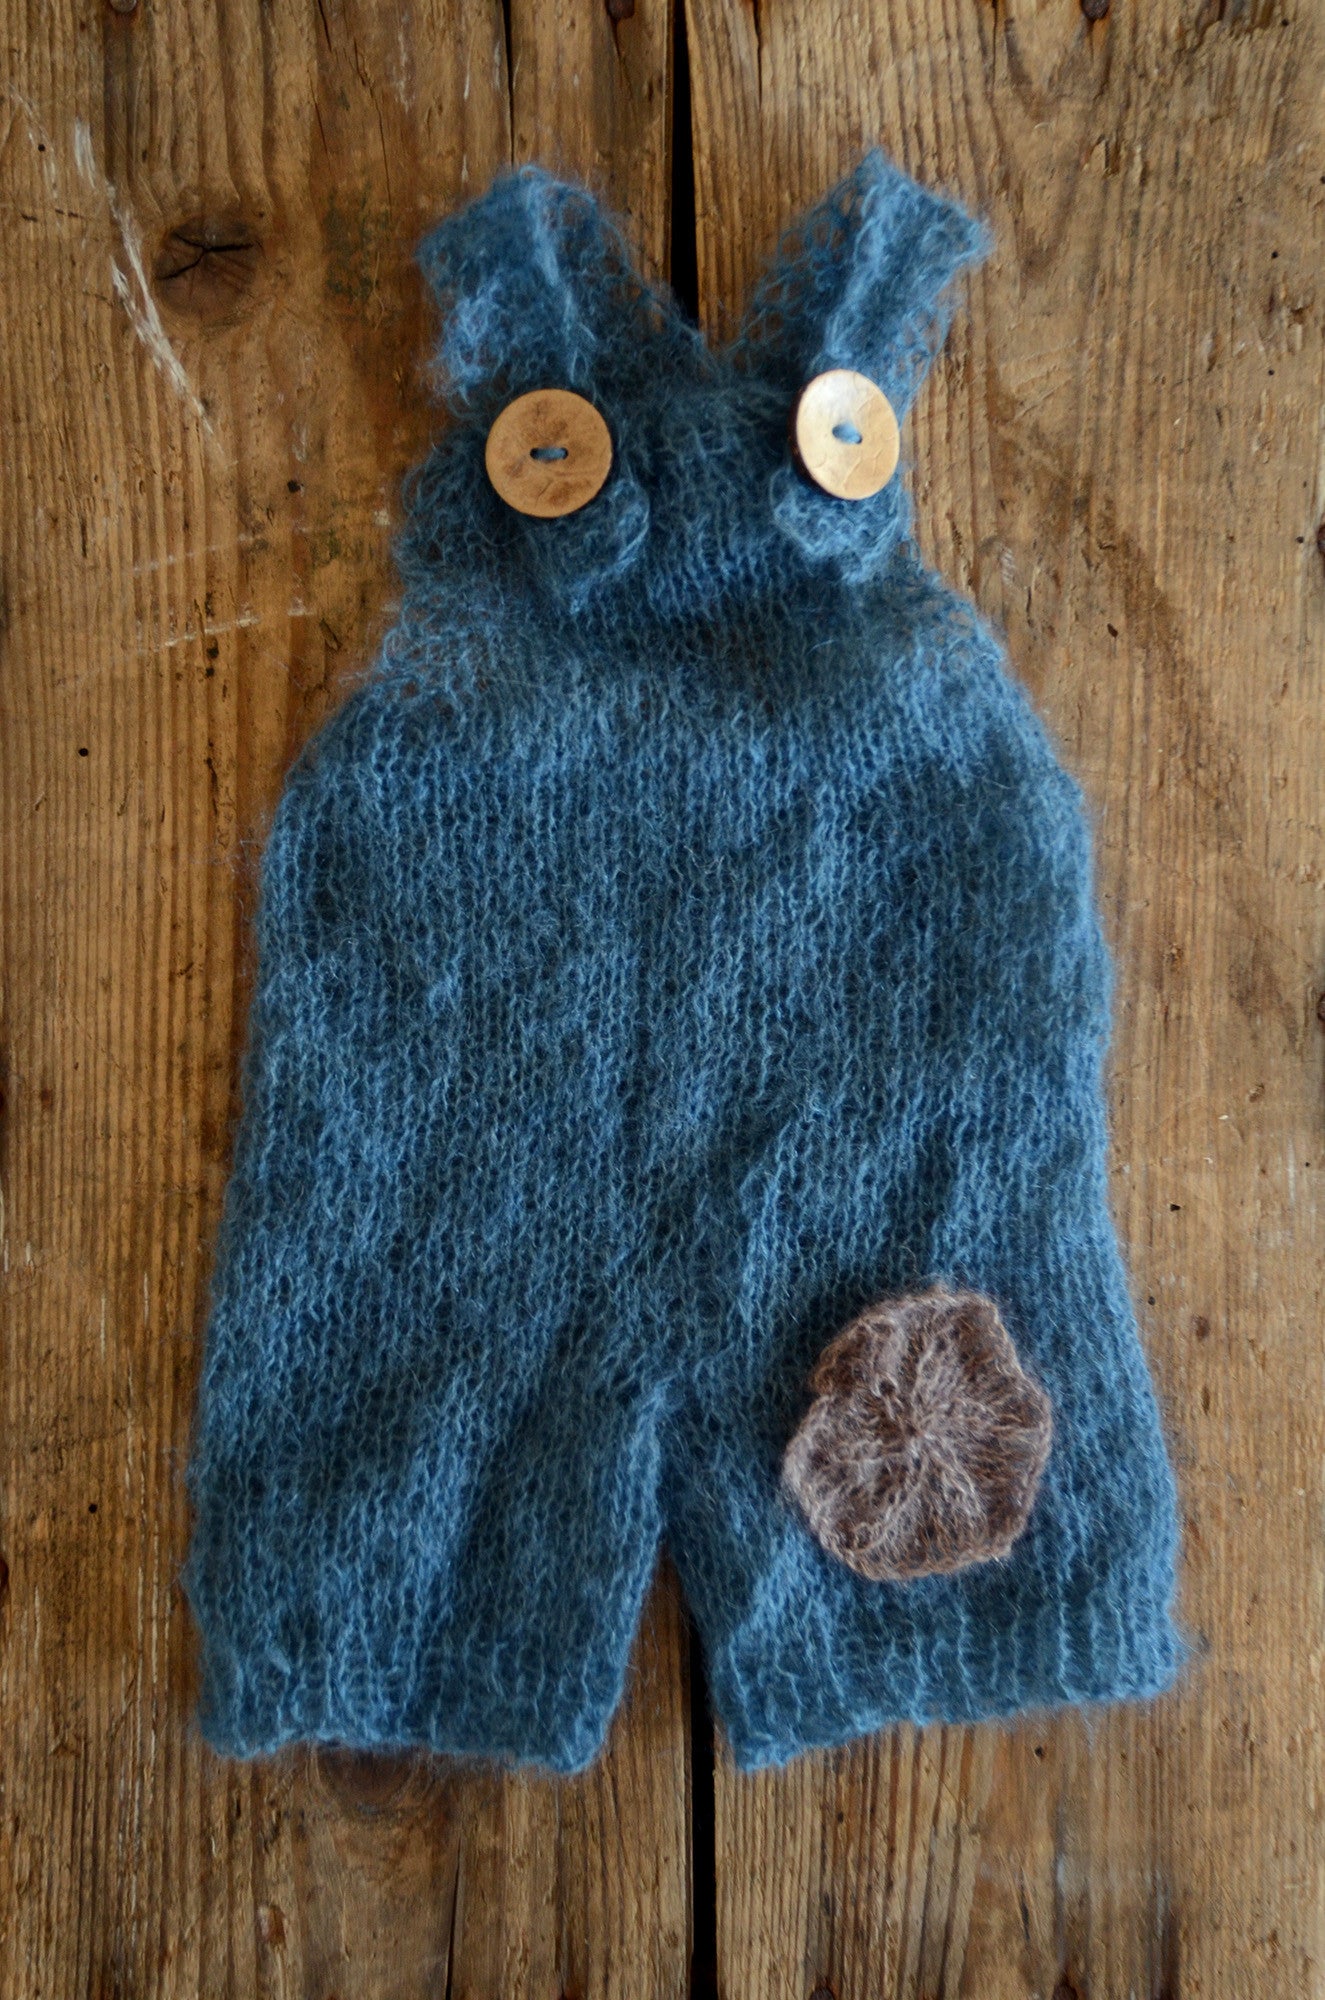 Mohair Overall with Patch and Buttons - Steel Blue-Newborn Photography Props